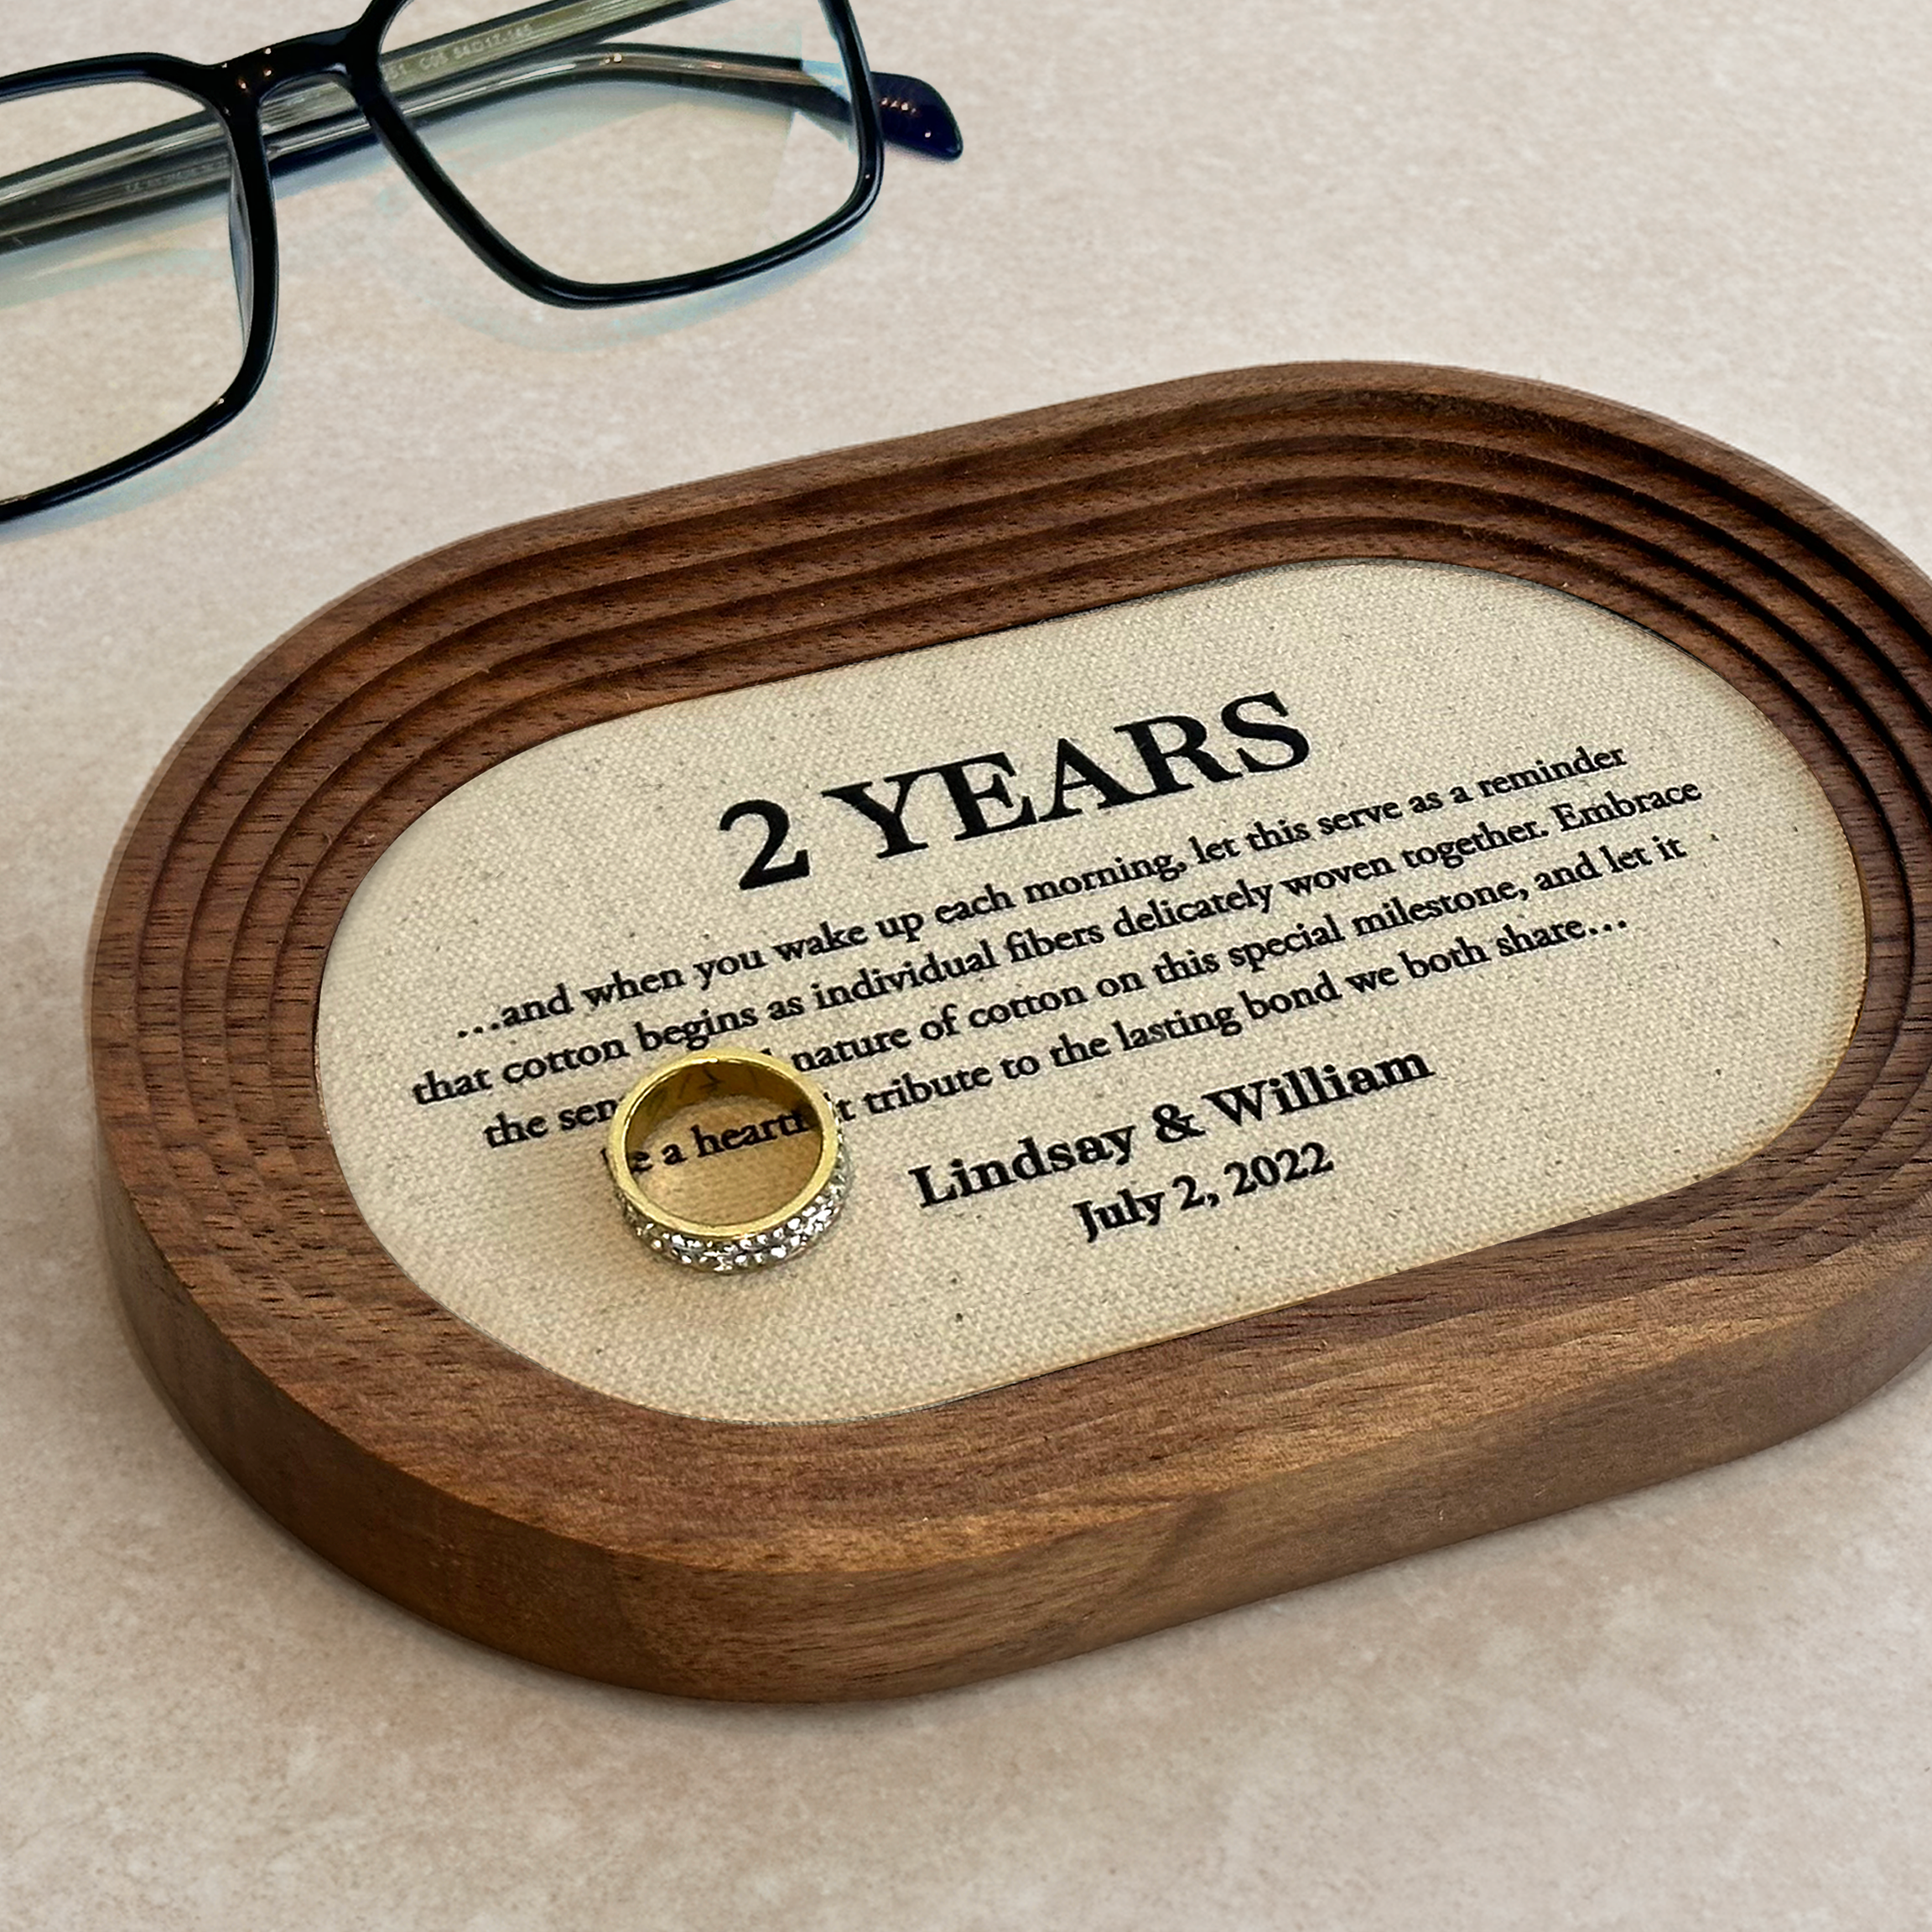 Catchall tray with customization on cotton for 2nd Anniversary